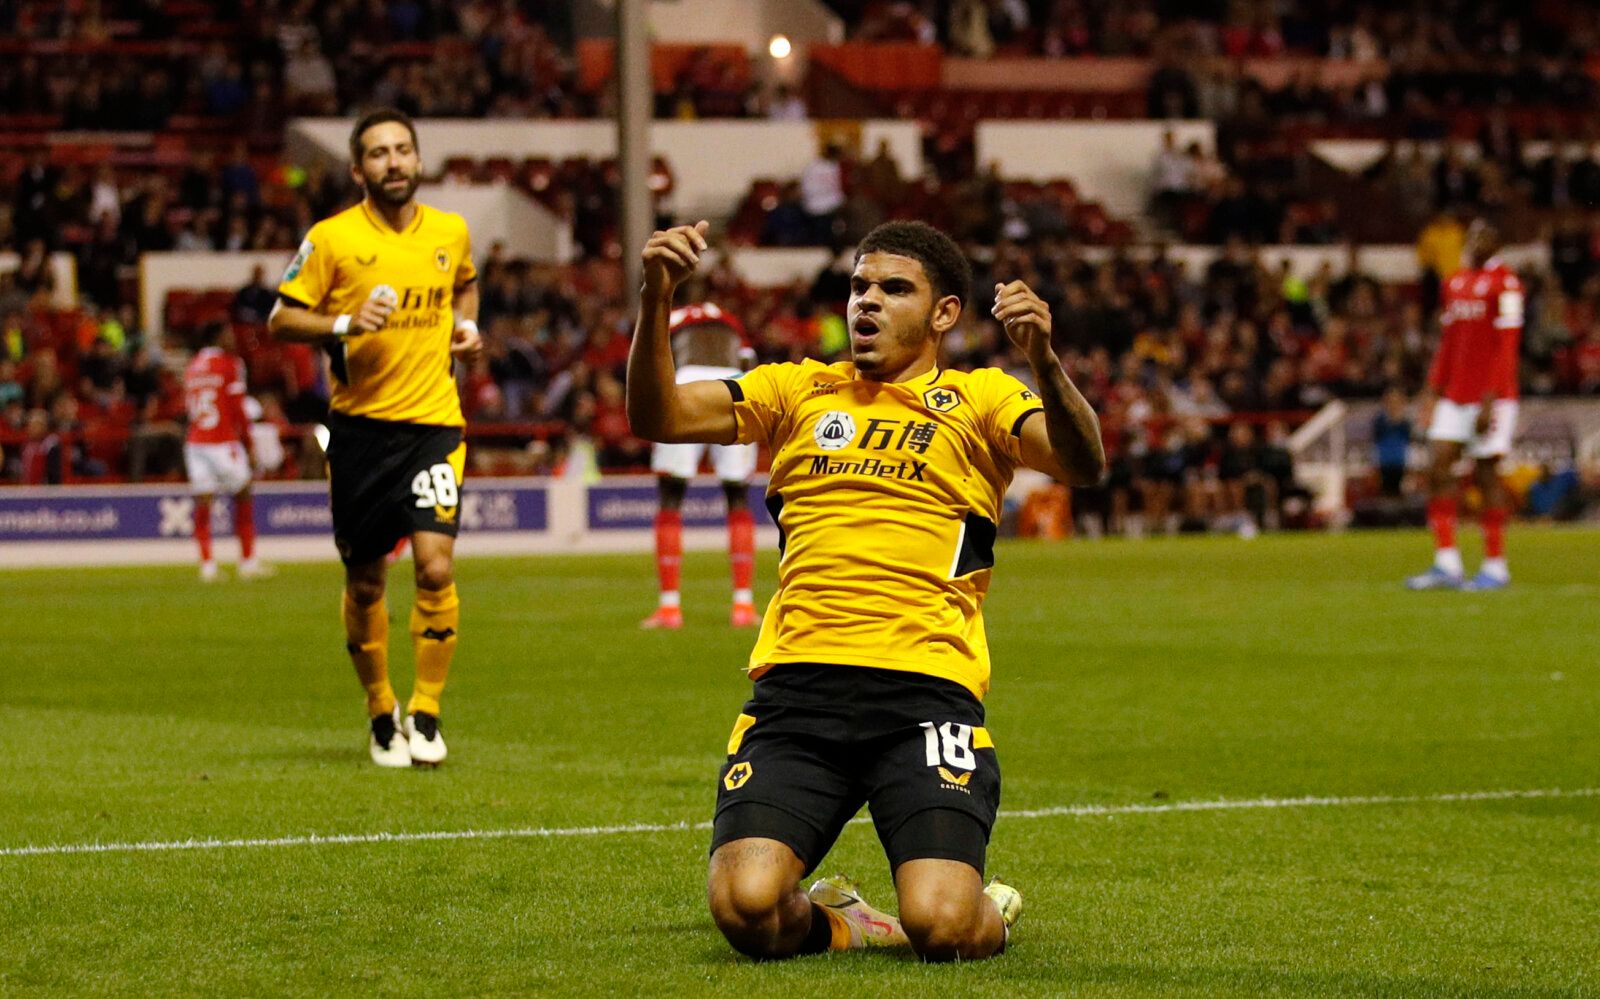 Soccer - England - Carabao Cup Second Round - Nottingham Forest v Wolverhampton Wanderers - The City Ground, Nottingham, Britain - August 24, 2021 Wolverhampton Wanderers' Morgan Gibbs-White celebrates scoring their fourth goal Action Images via Reuters/Andrew Boyers